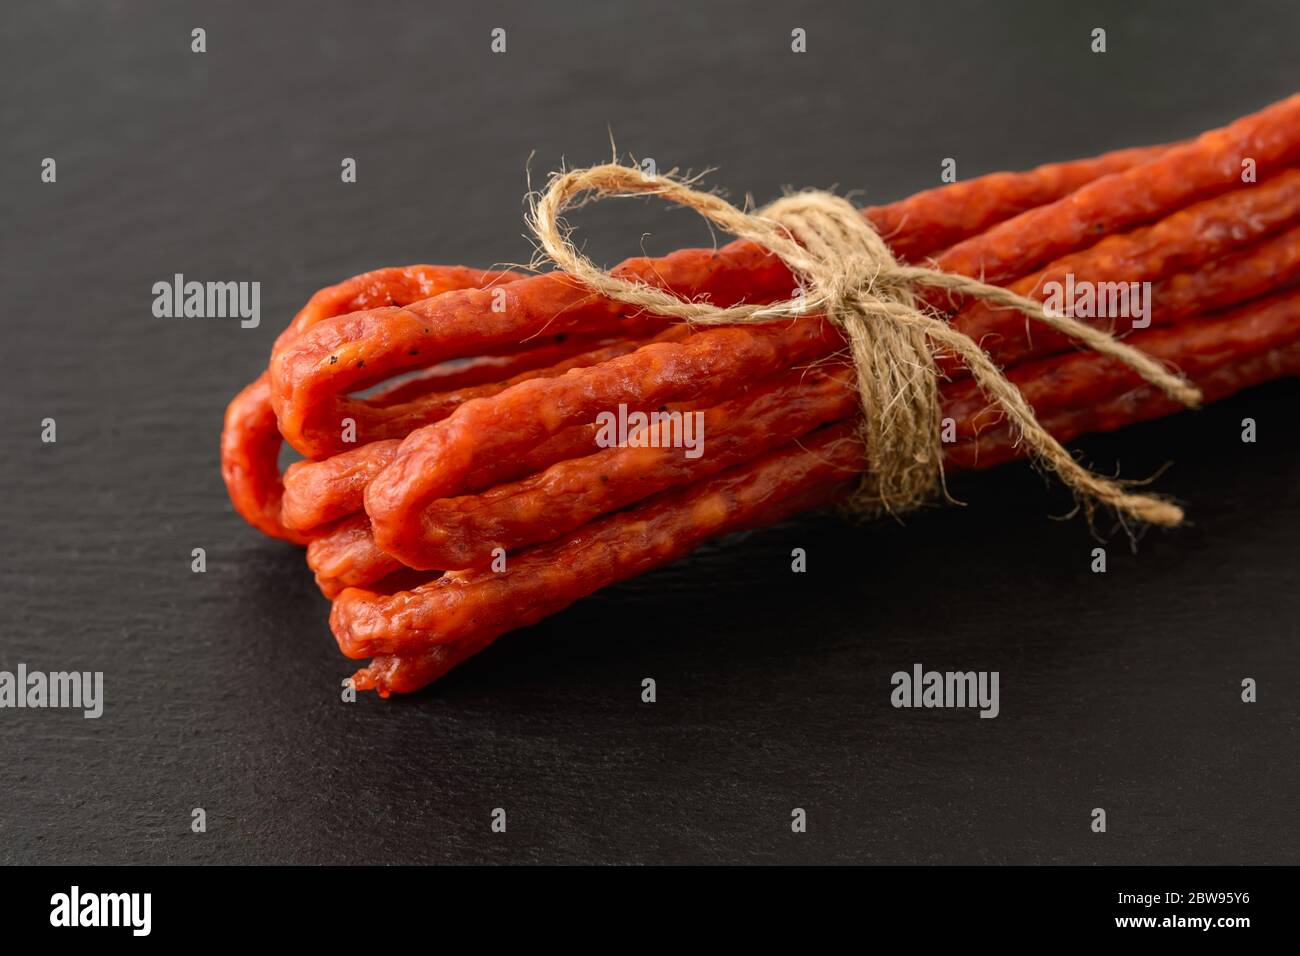 Close-up of thin dry smoked sausage kabanos or cabanossi on a black stone serving board. Traditional polish meat delicacy. Front view. Stock Photo